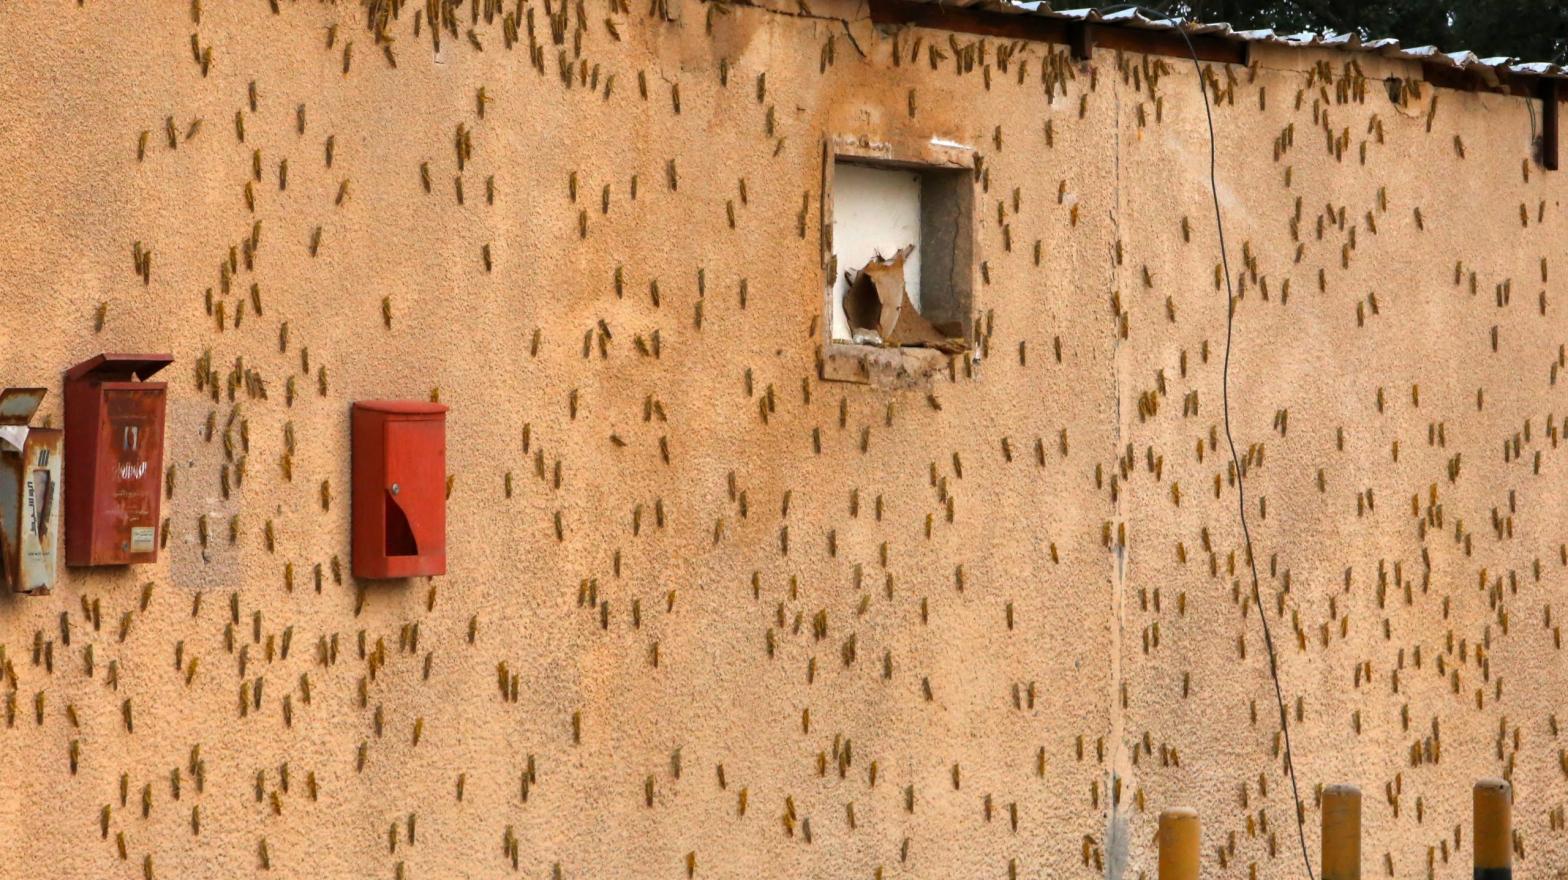 The wall of a building is covered with a swarm of desert locusts that were blown to Kuwait City by strong winds, on March 24, 2021. (Photo: Yasser Al-Zayyat, Getty Images)